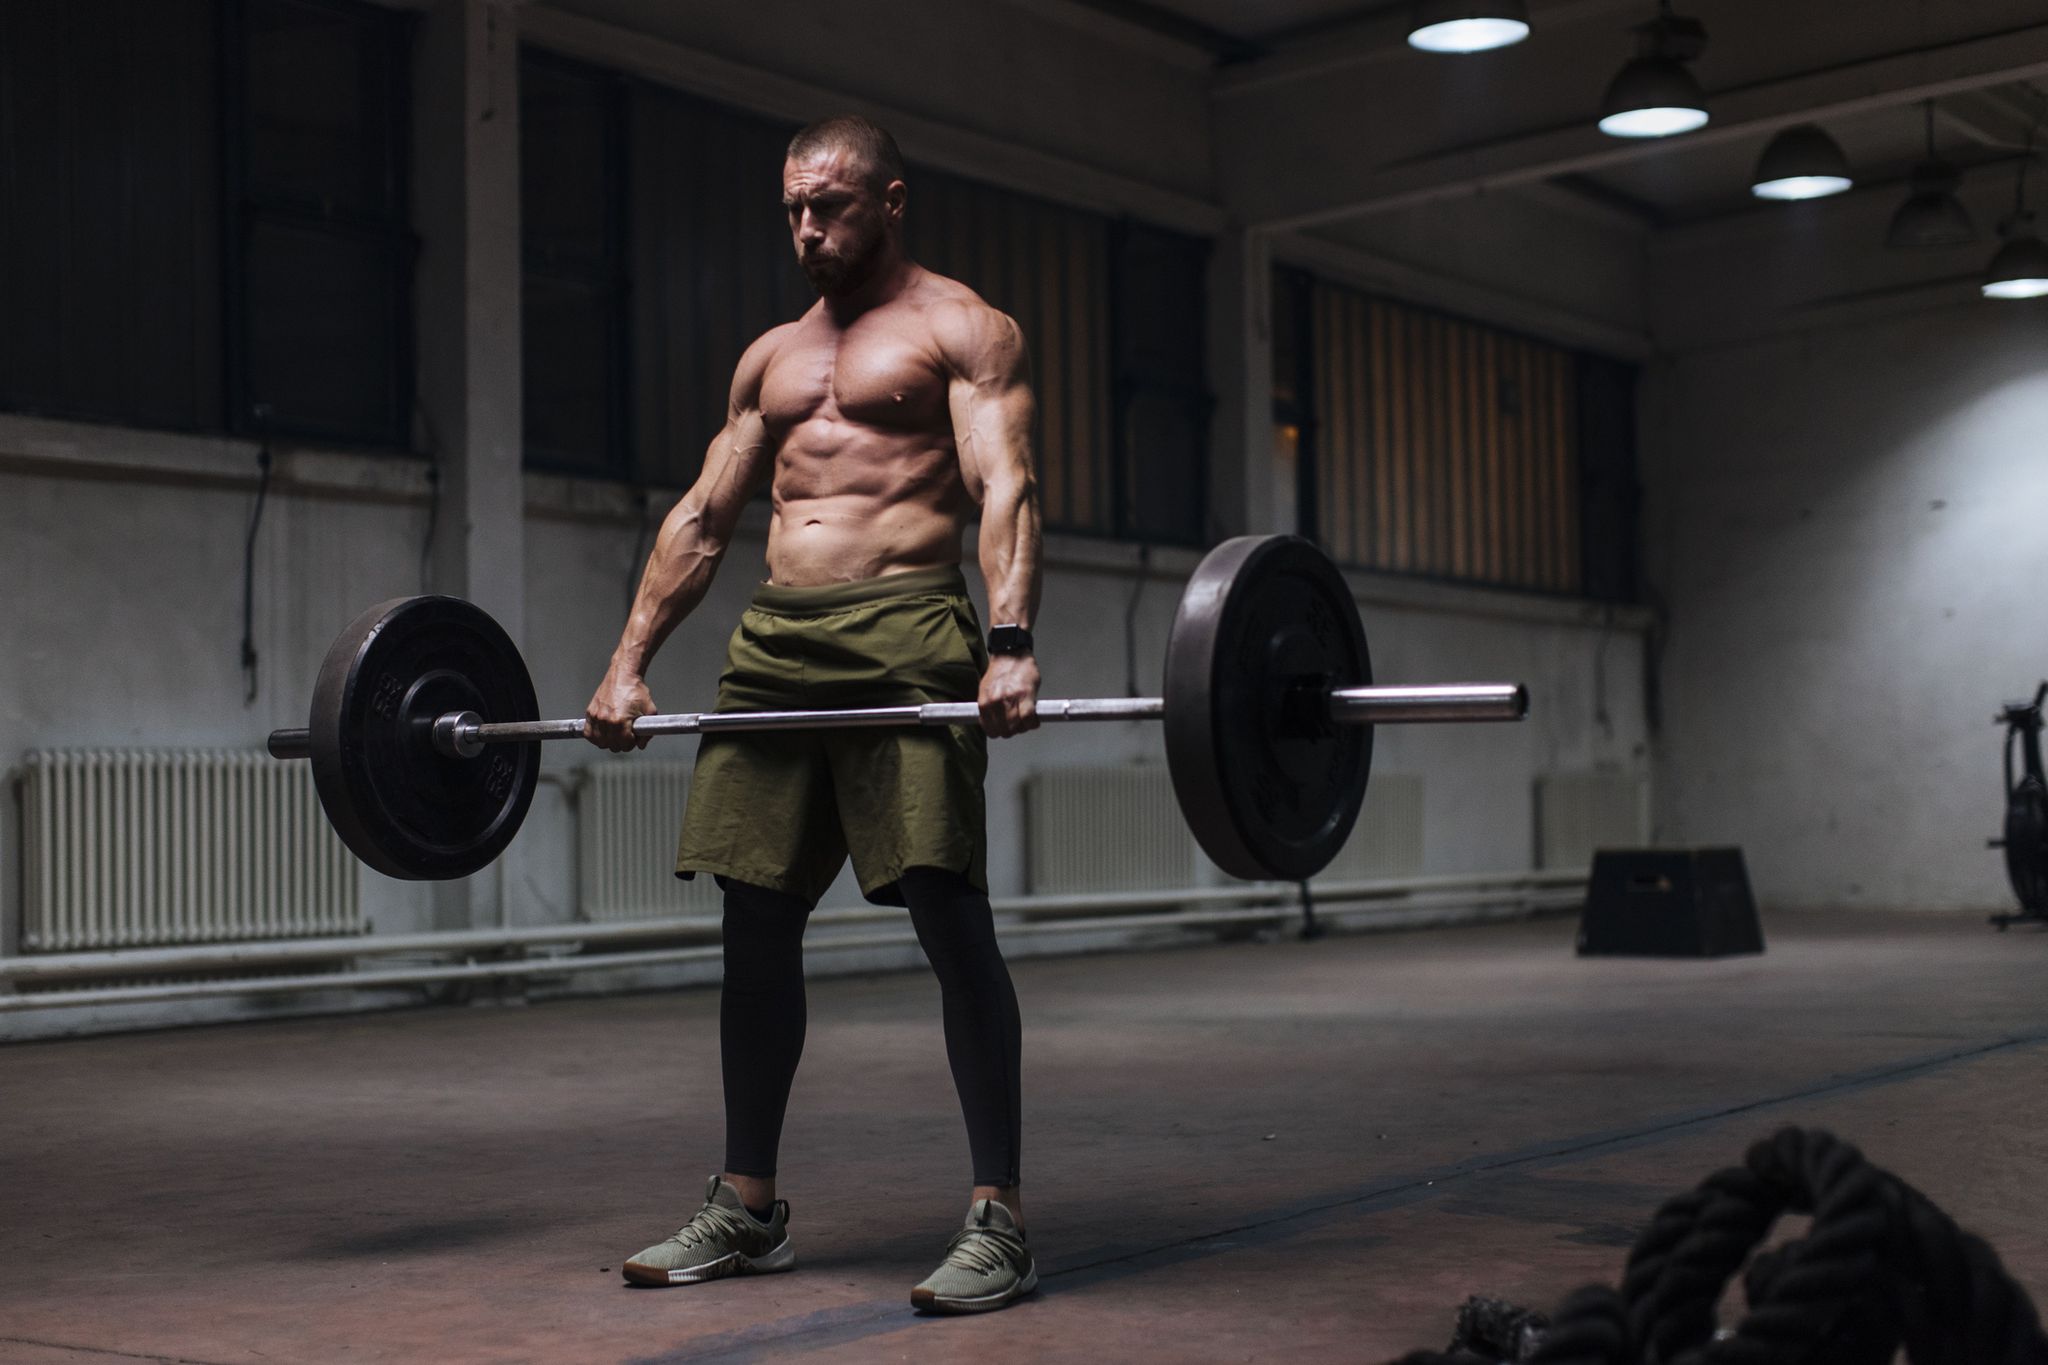 The Ultimate Guide To The Single Leg Deadlift For Better Movement